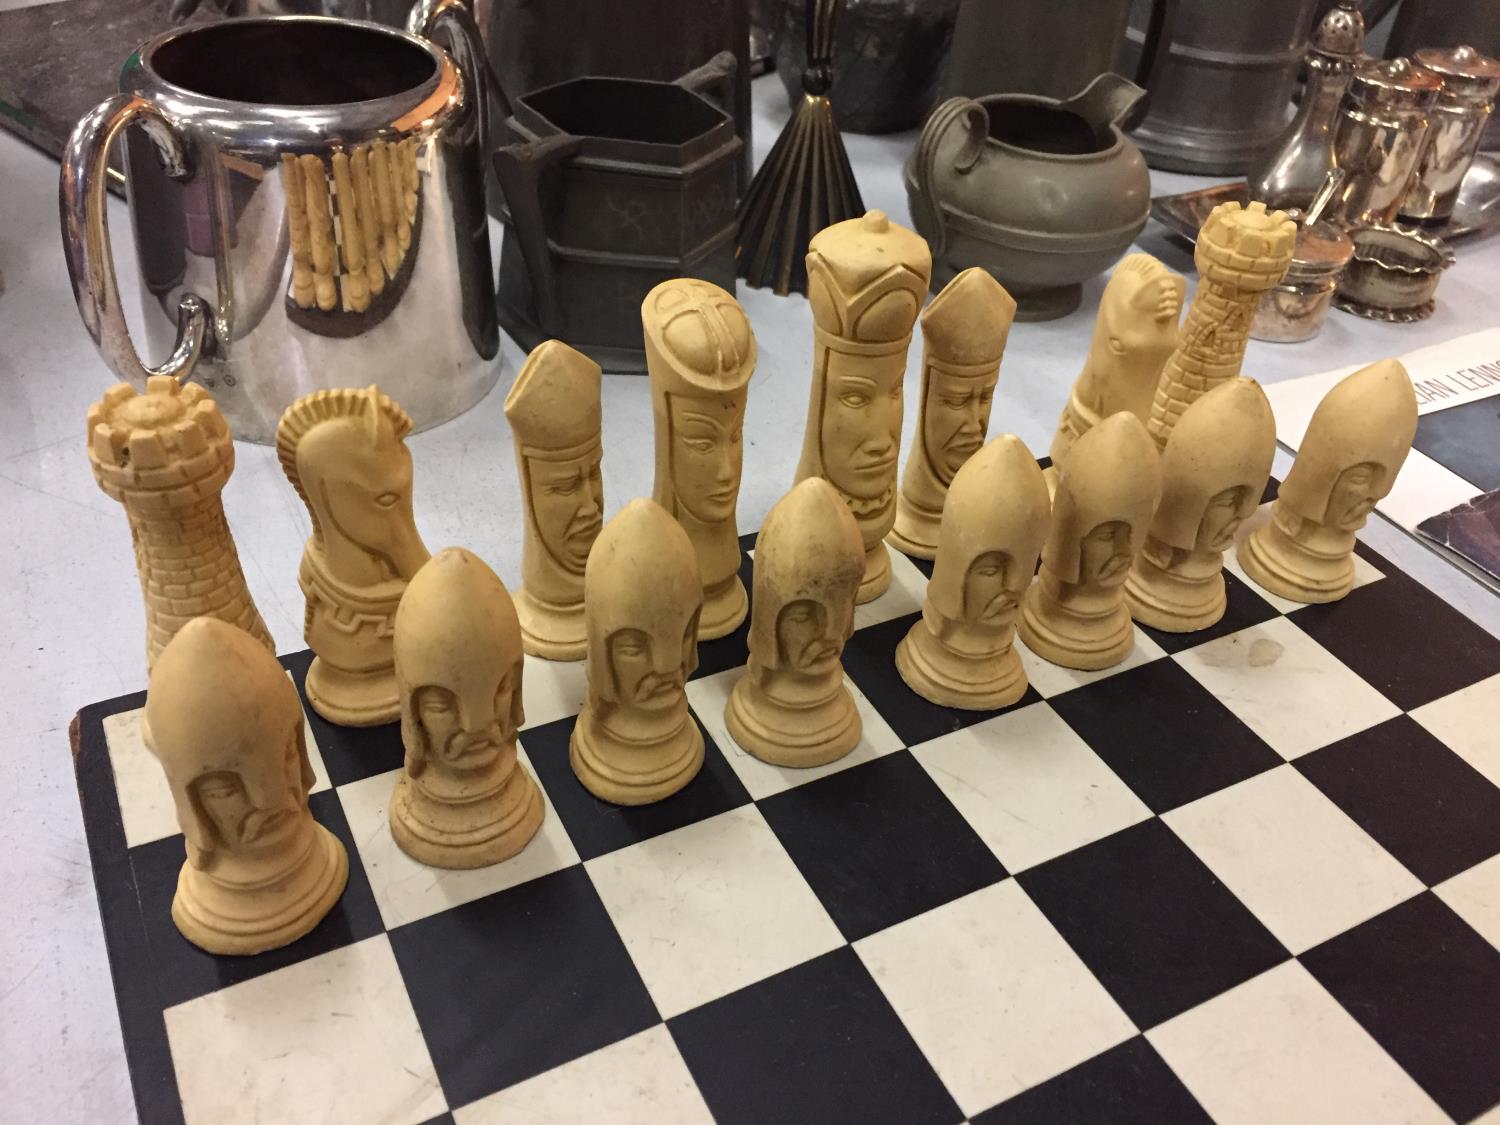 A COMPLETE CHESS SET WITH RESIN CHESS PIECES - Bild 2 aus 3